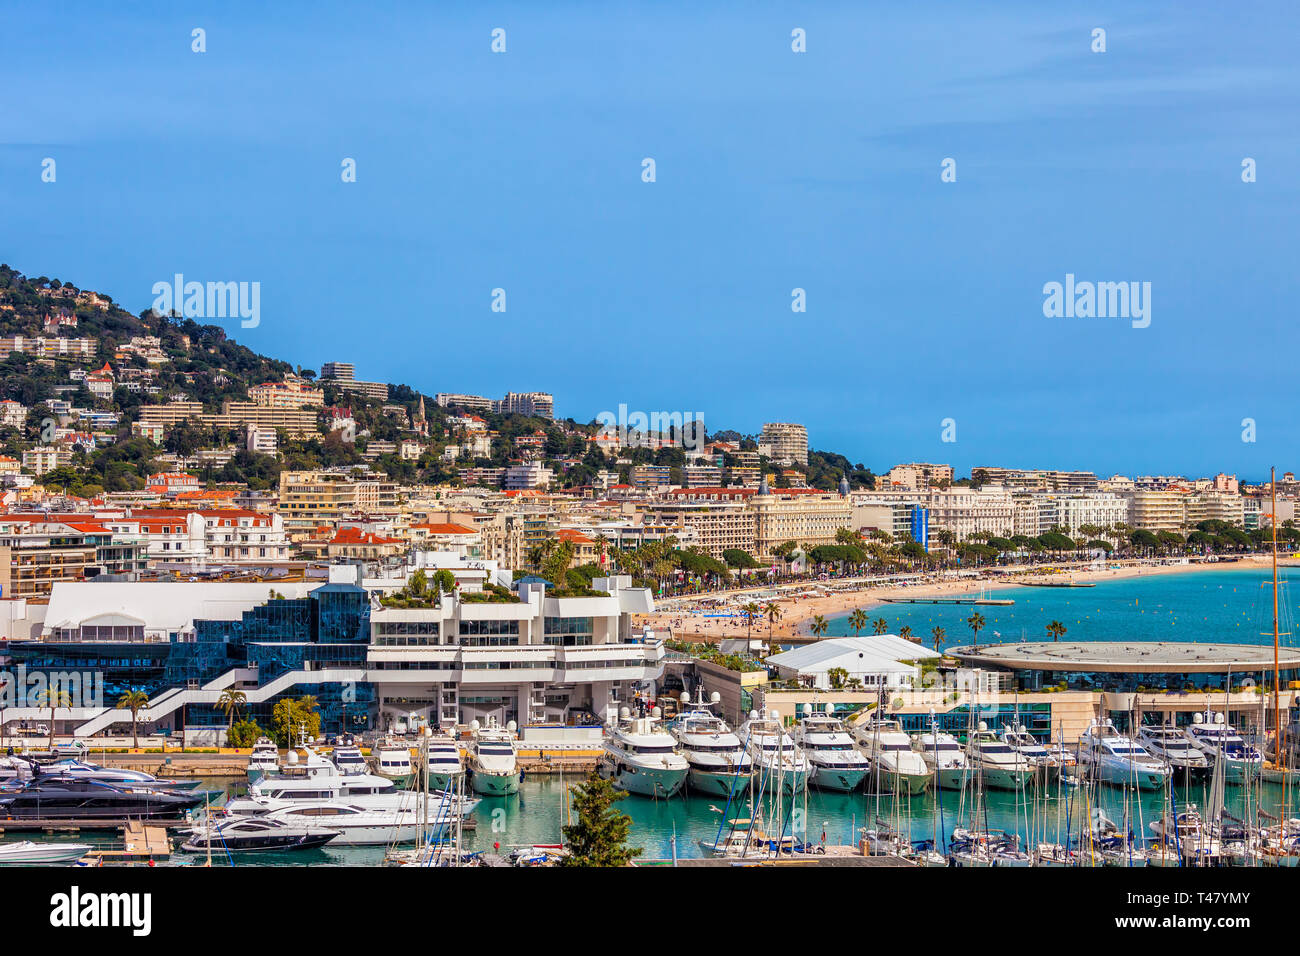 City of Cannes in France, skyline view over Le Vieux Port and Palais ...